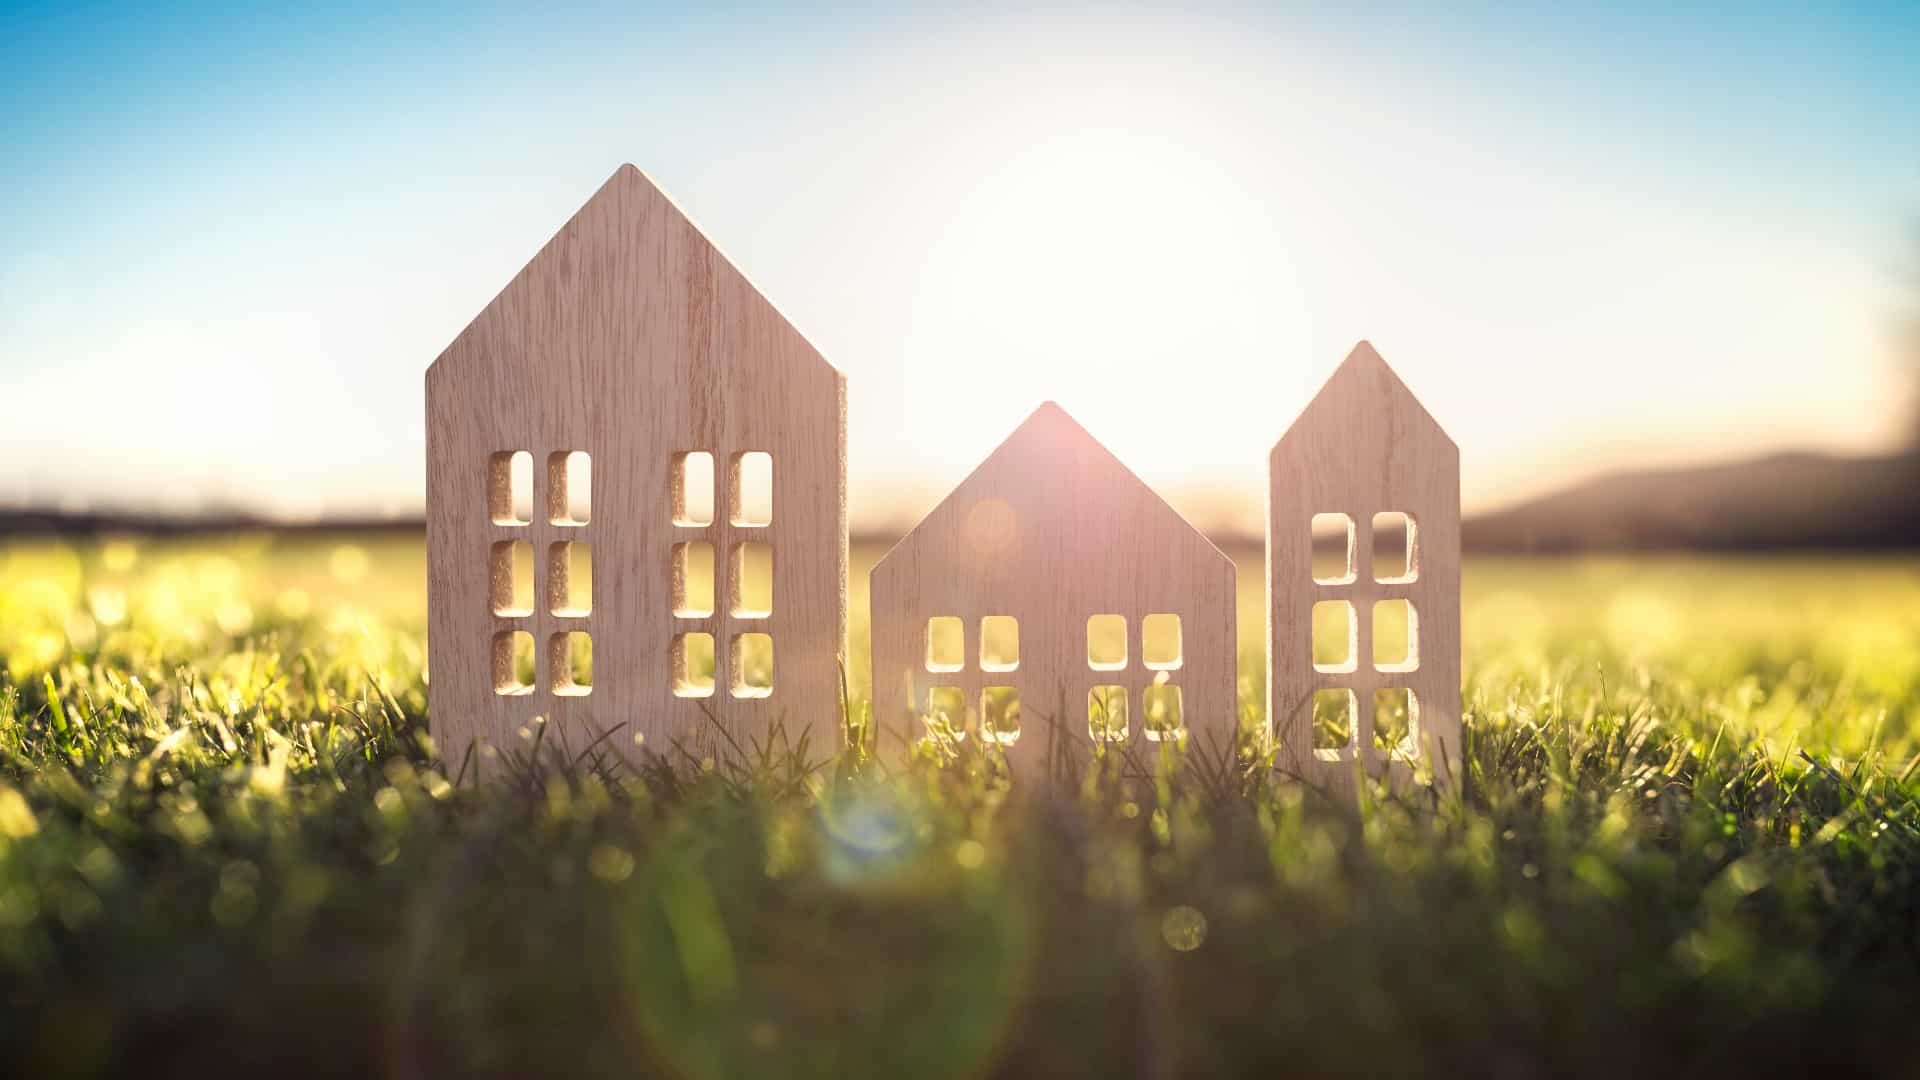 Ecological wood  model house in empty field at sunset